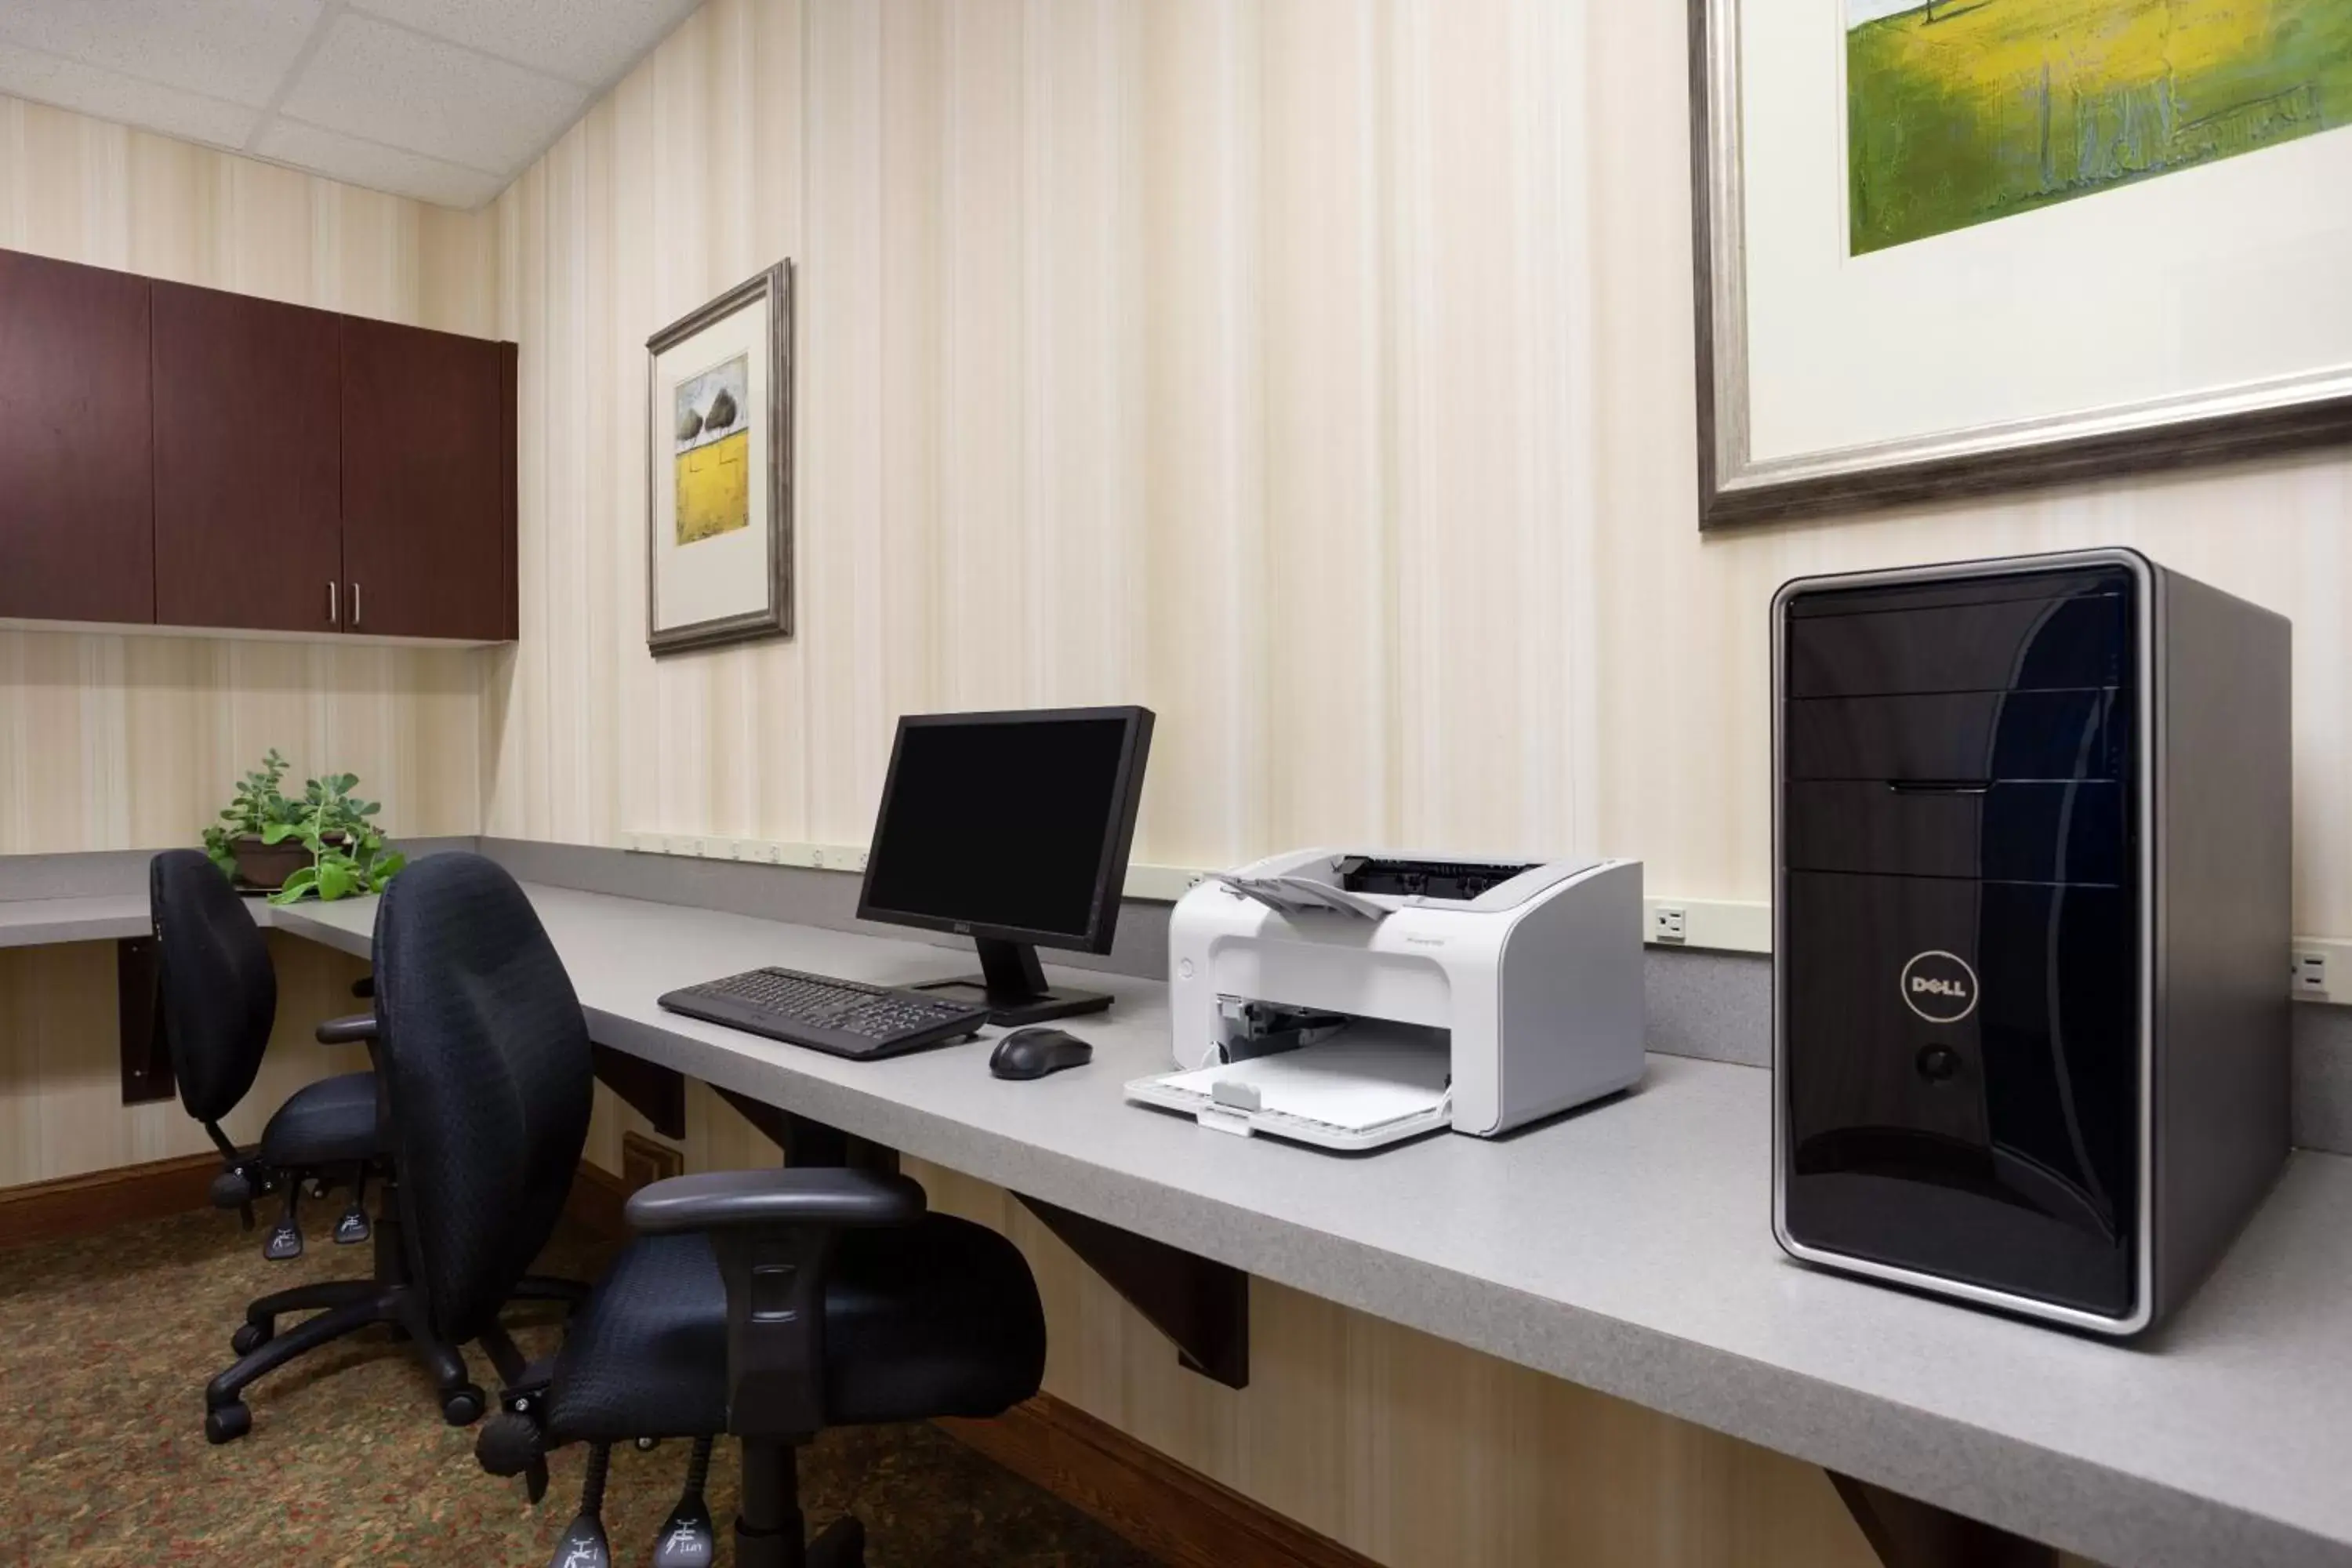 Business facilities in Country Inn & Suites by Radisson, Ithaca, NY